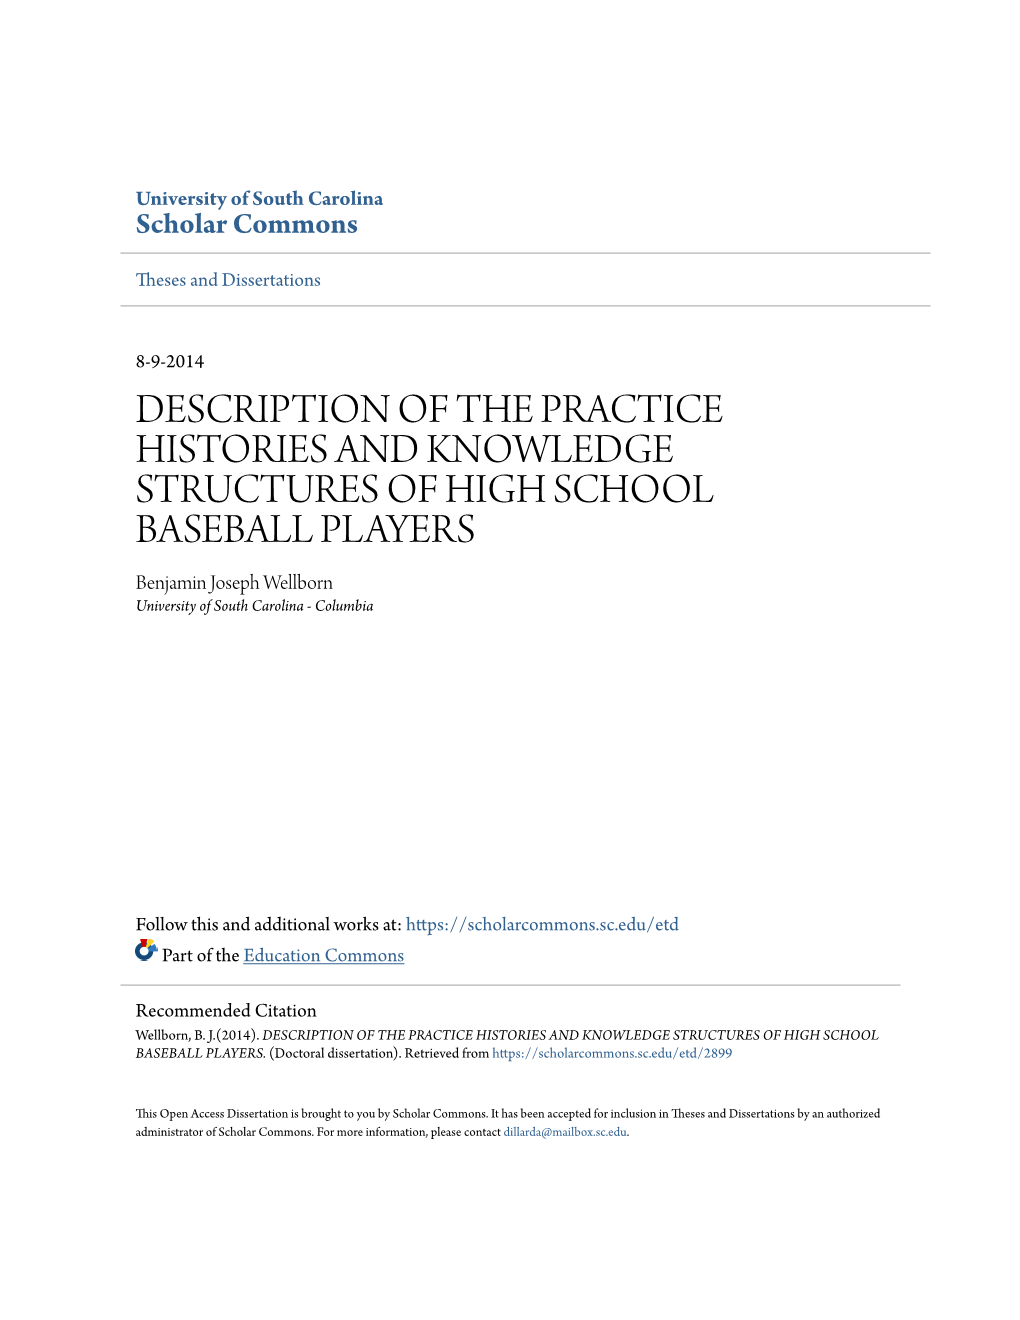 DESCRIPTION of the PRACTICE HISTORIES and KNOWLEDGE STRUCTURES of HIGH SCHOOL BASEBALL PLAYERS Benjamin Joseph Wellborn University of South Carolina - Columbia